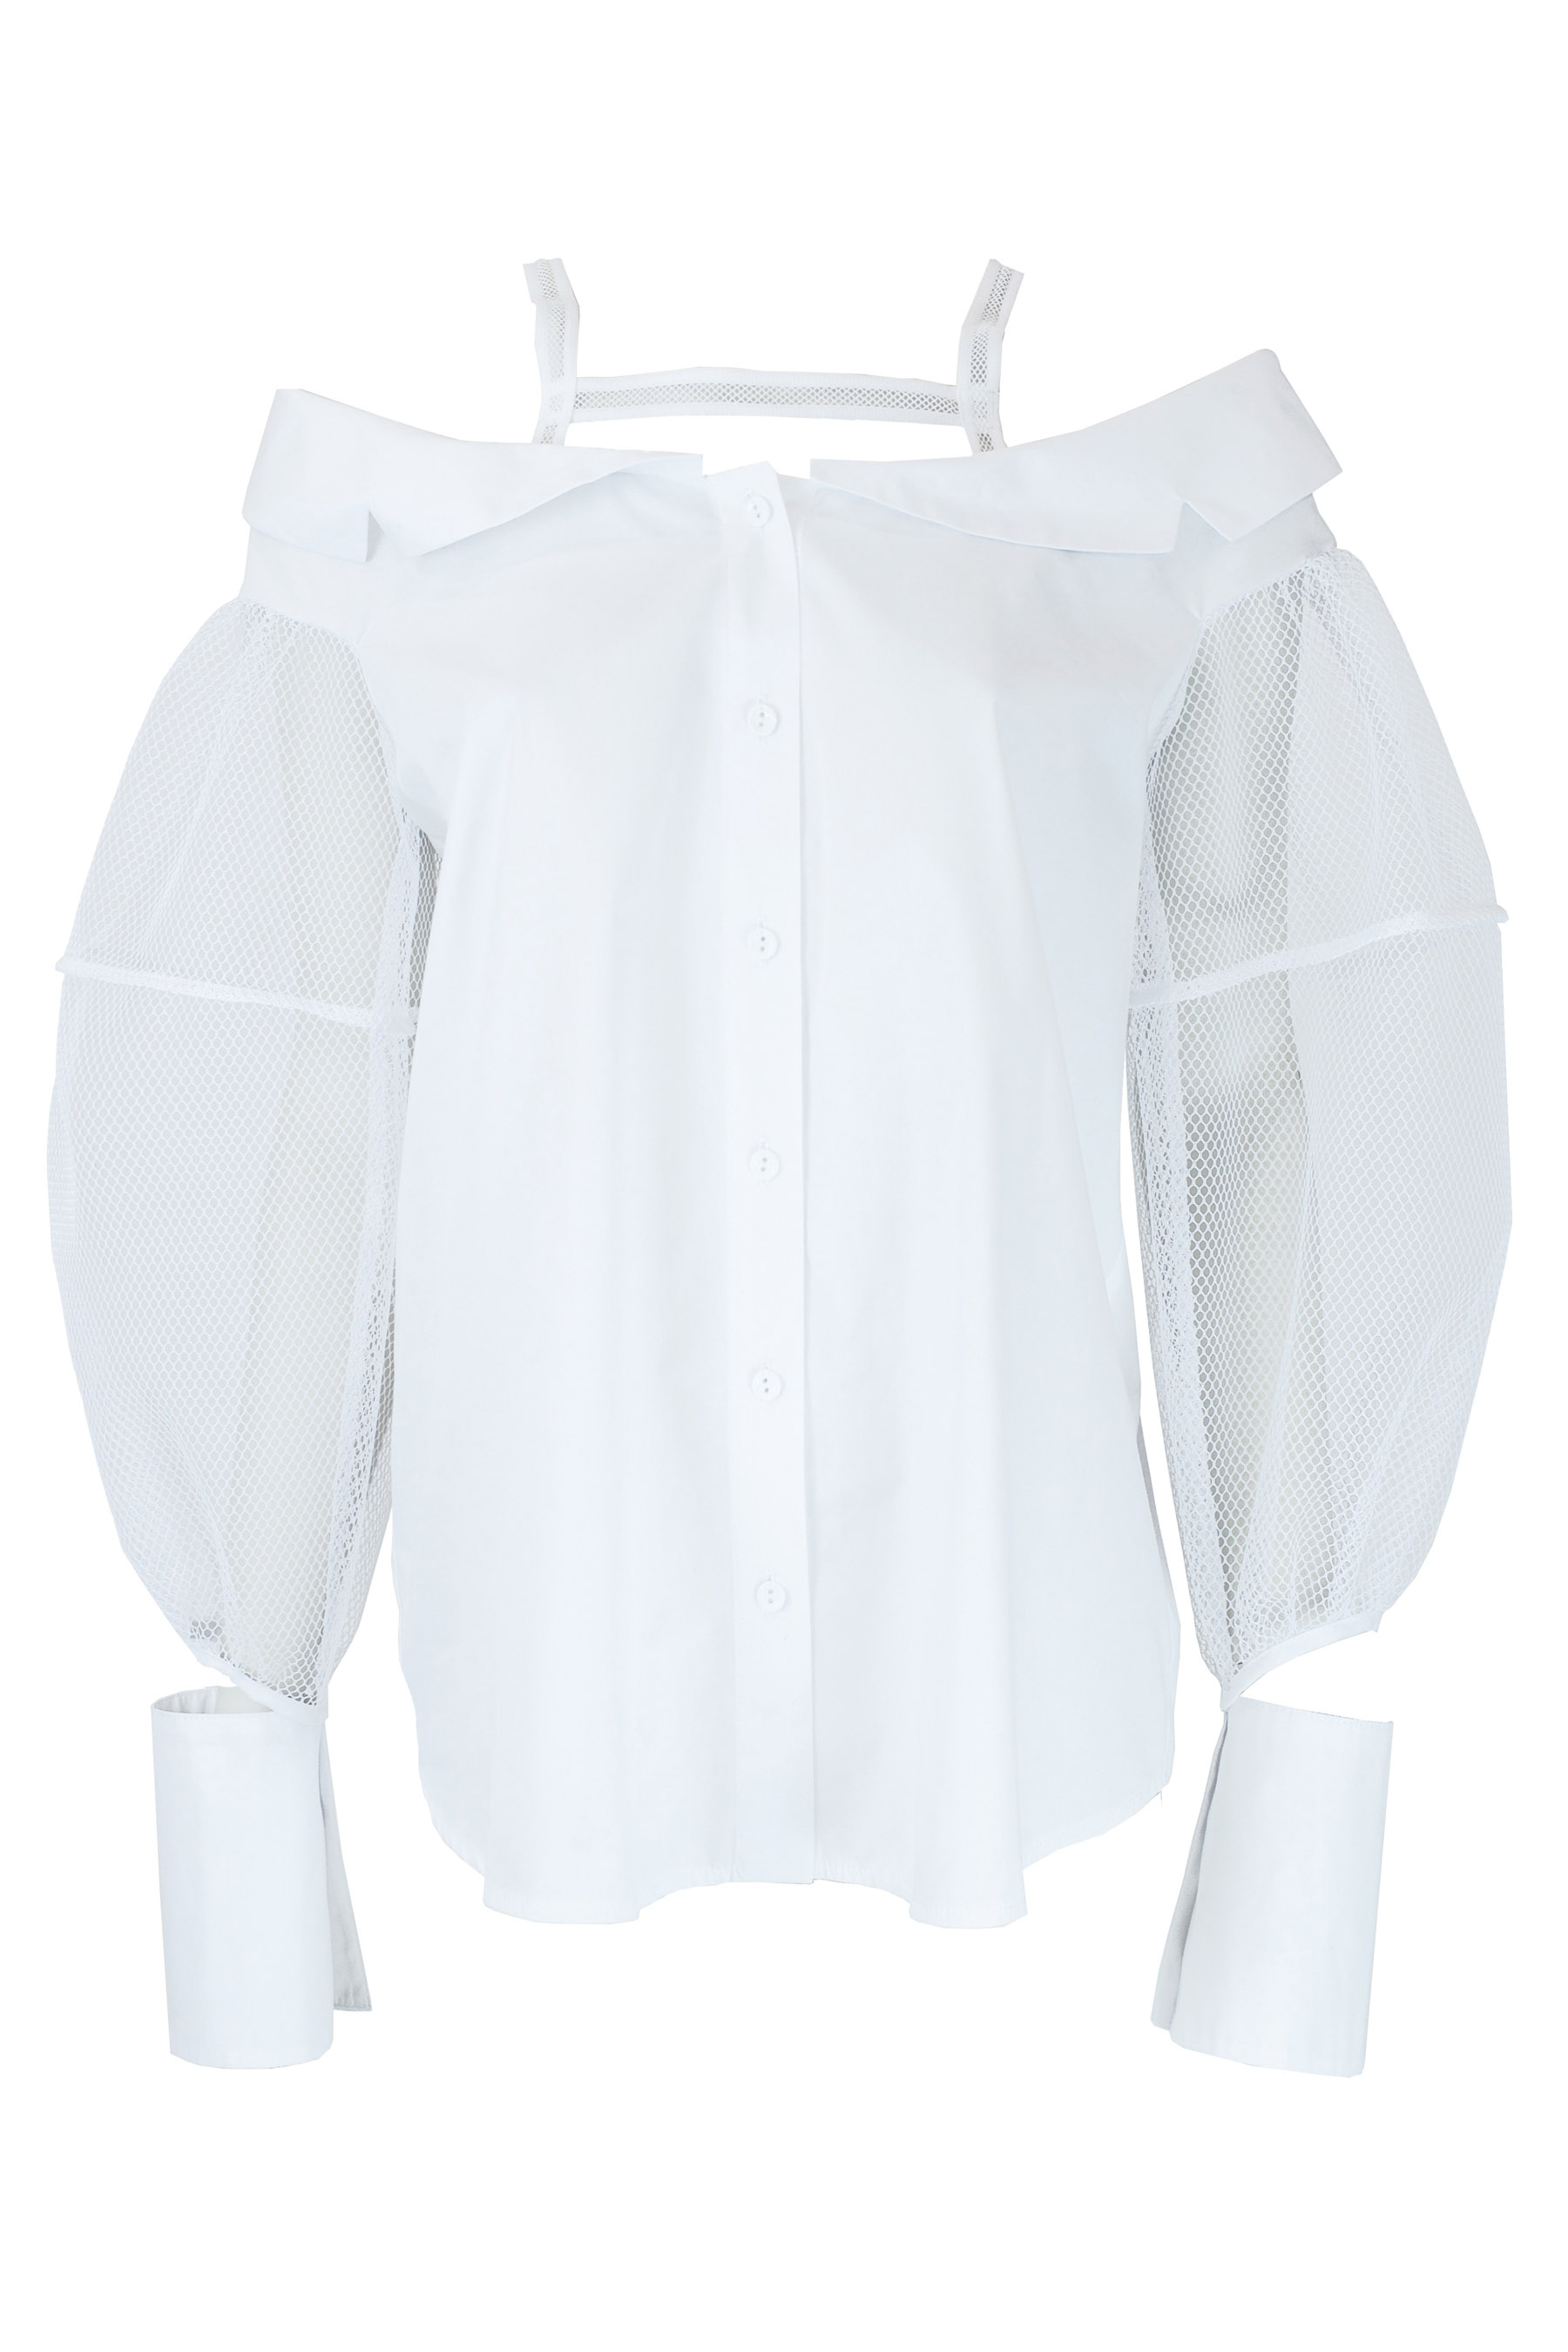 Blouse without shoulders white mesh sleeve photo